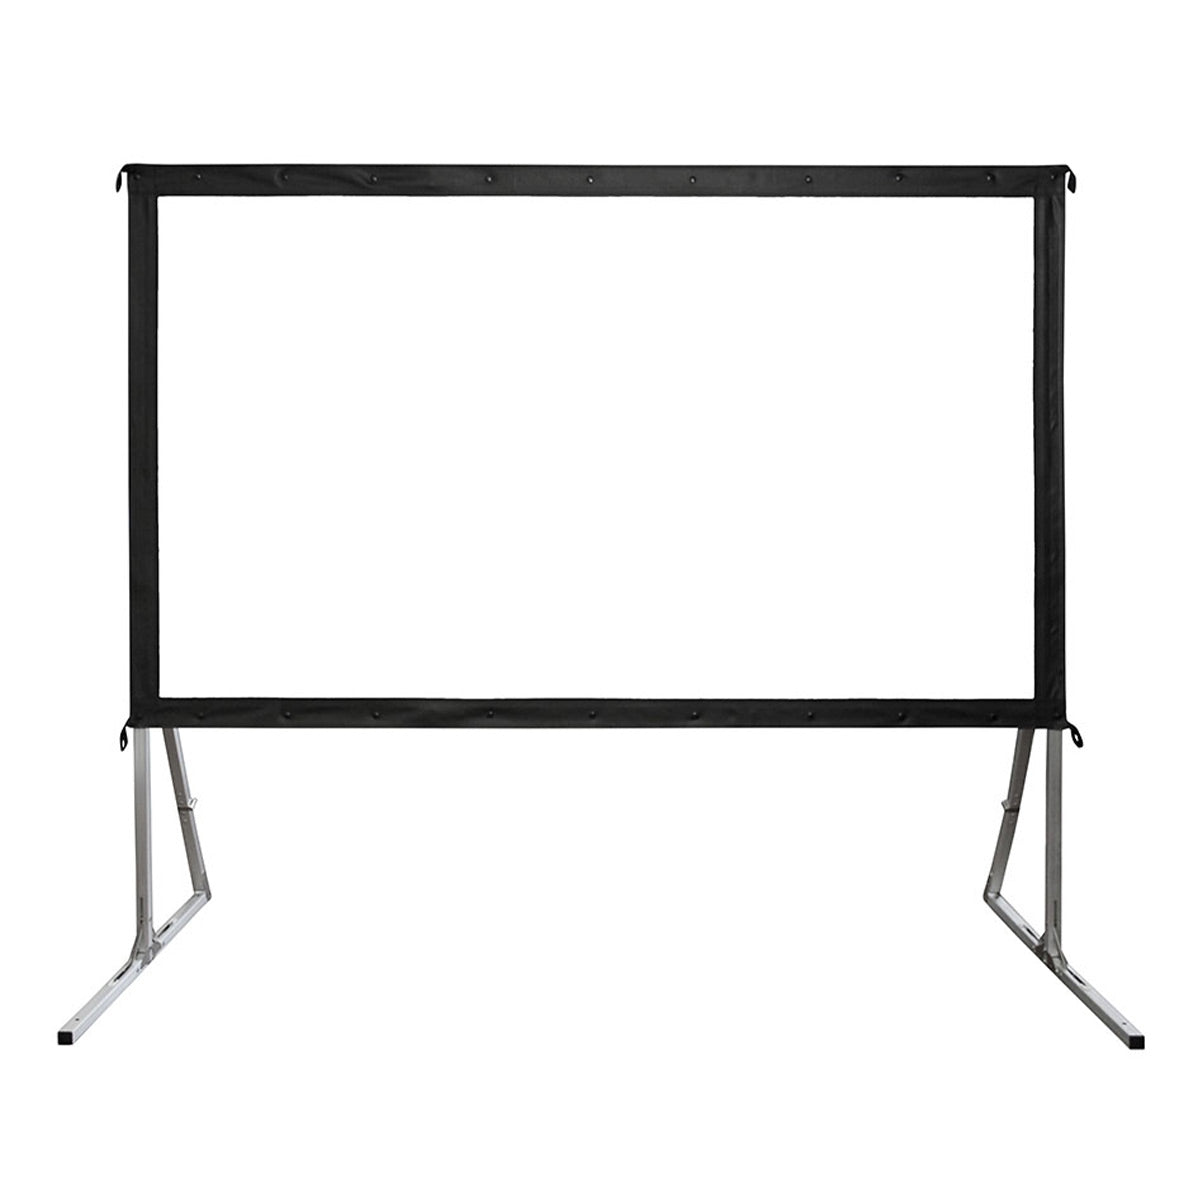 Elite Screens OMS110H2 Yard Master 2 110" CineWhite Outdoor Projector Screen